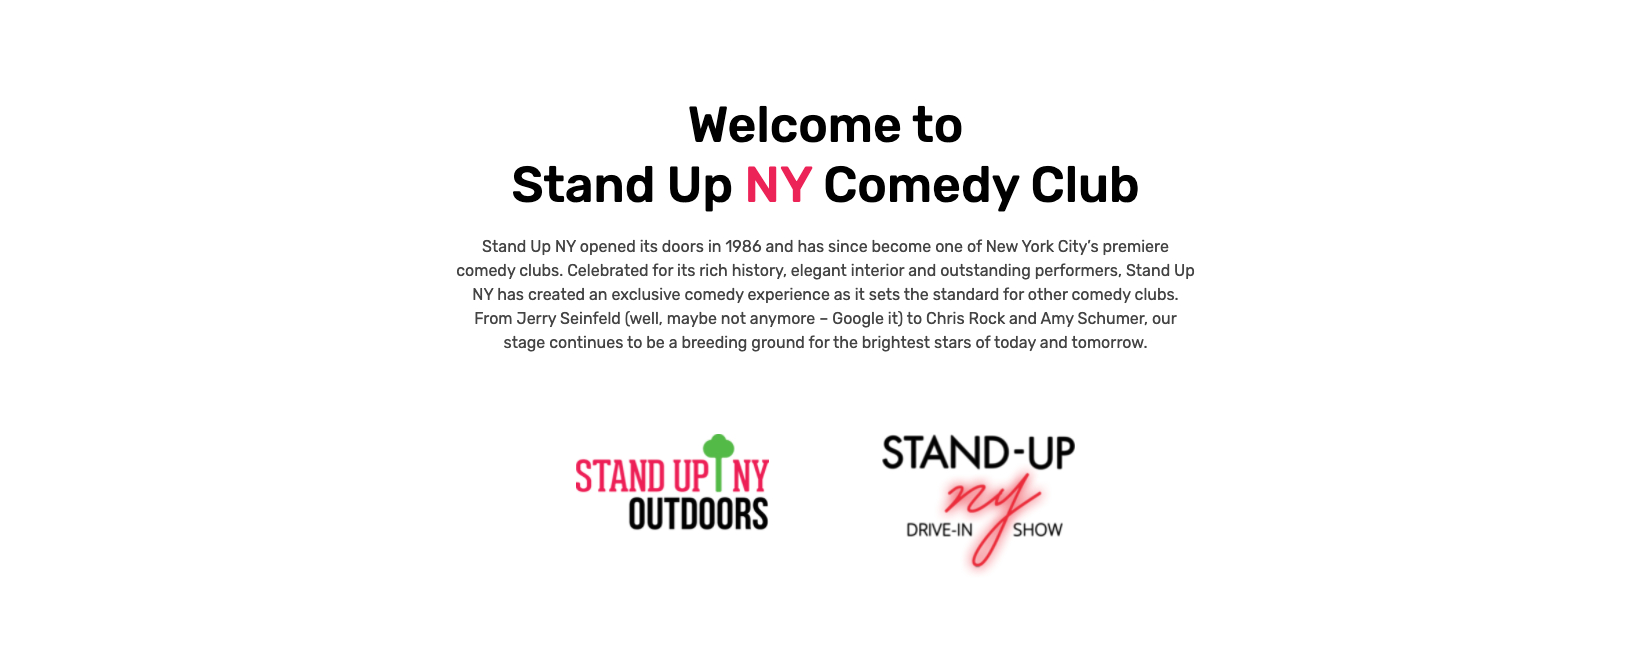 Stand up ny-image 1